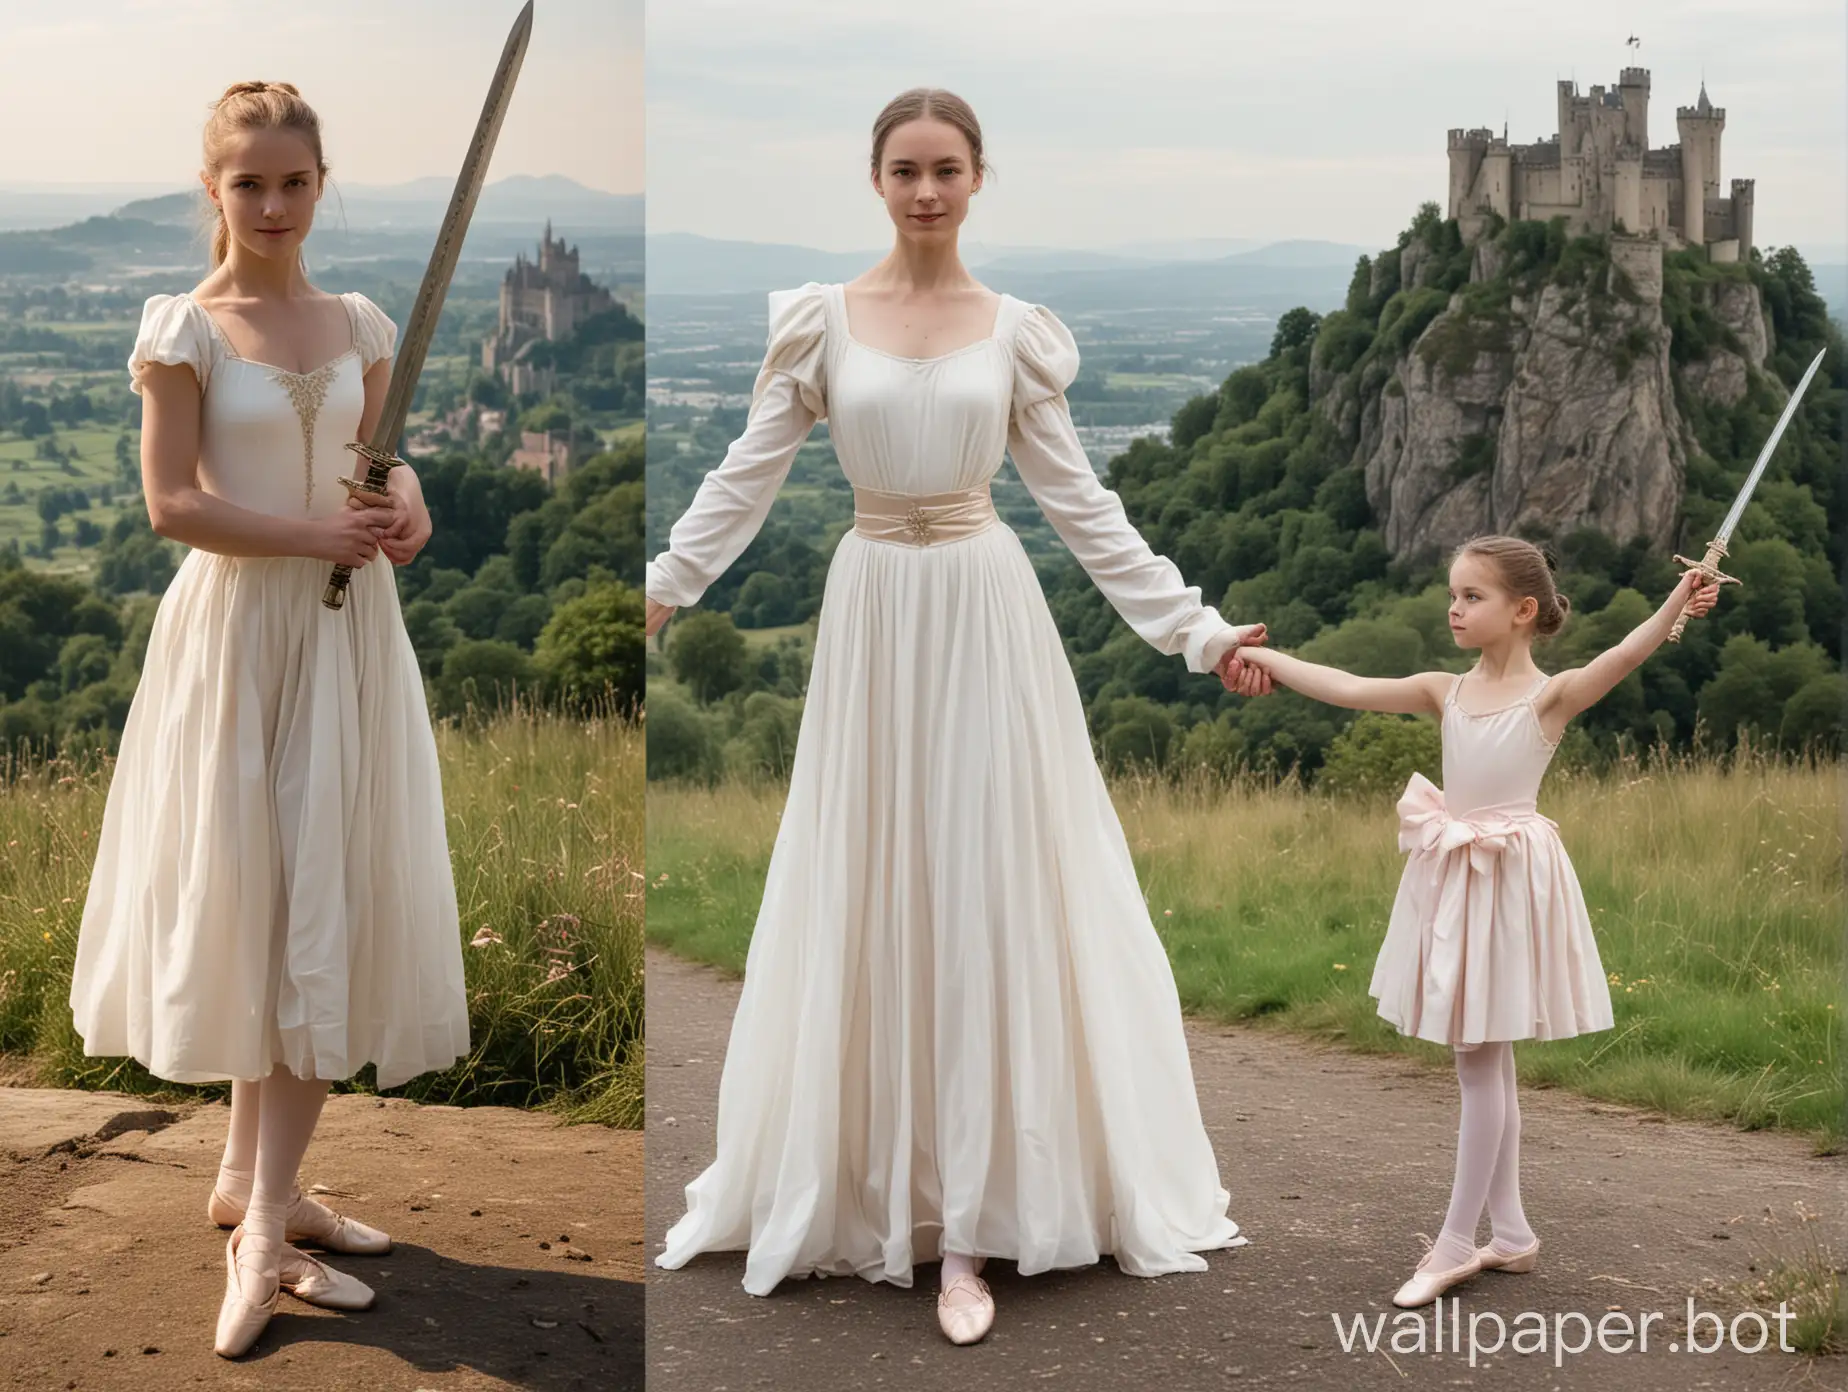 Graceful-Ballet-Girl-and-Warrior-Woman-with-Sword-near-Castle